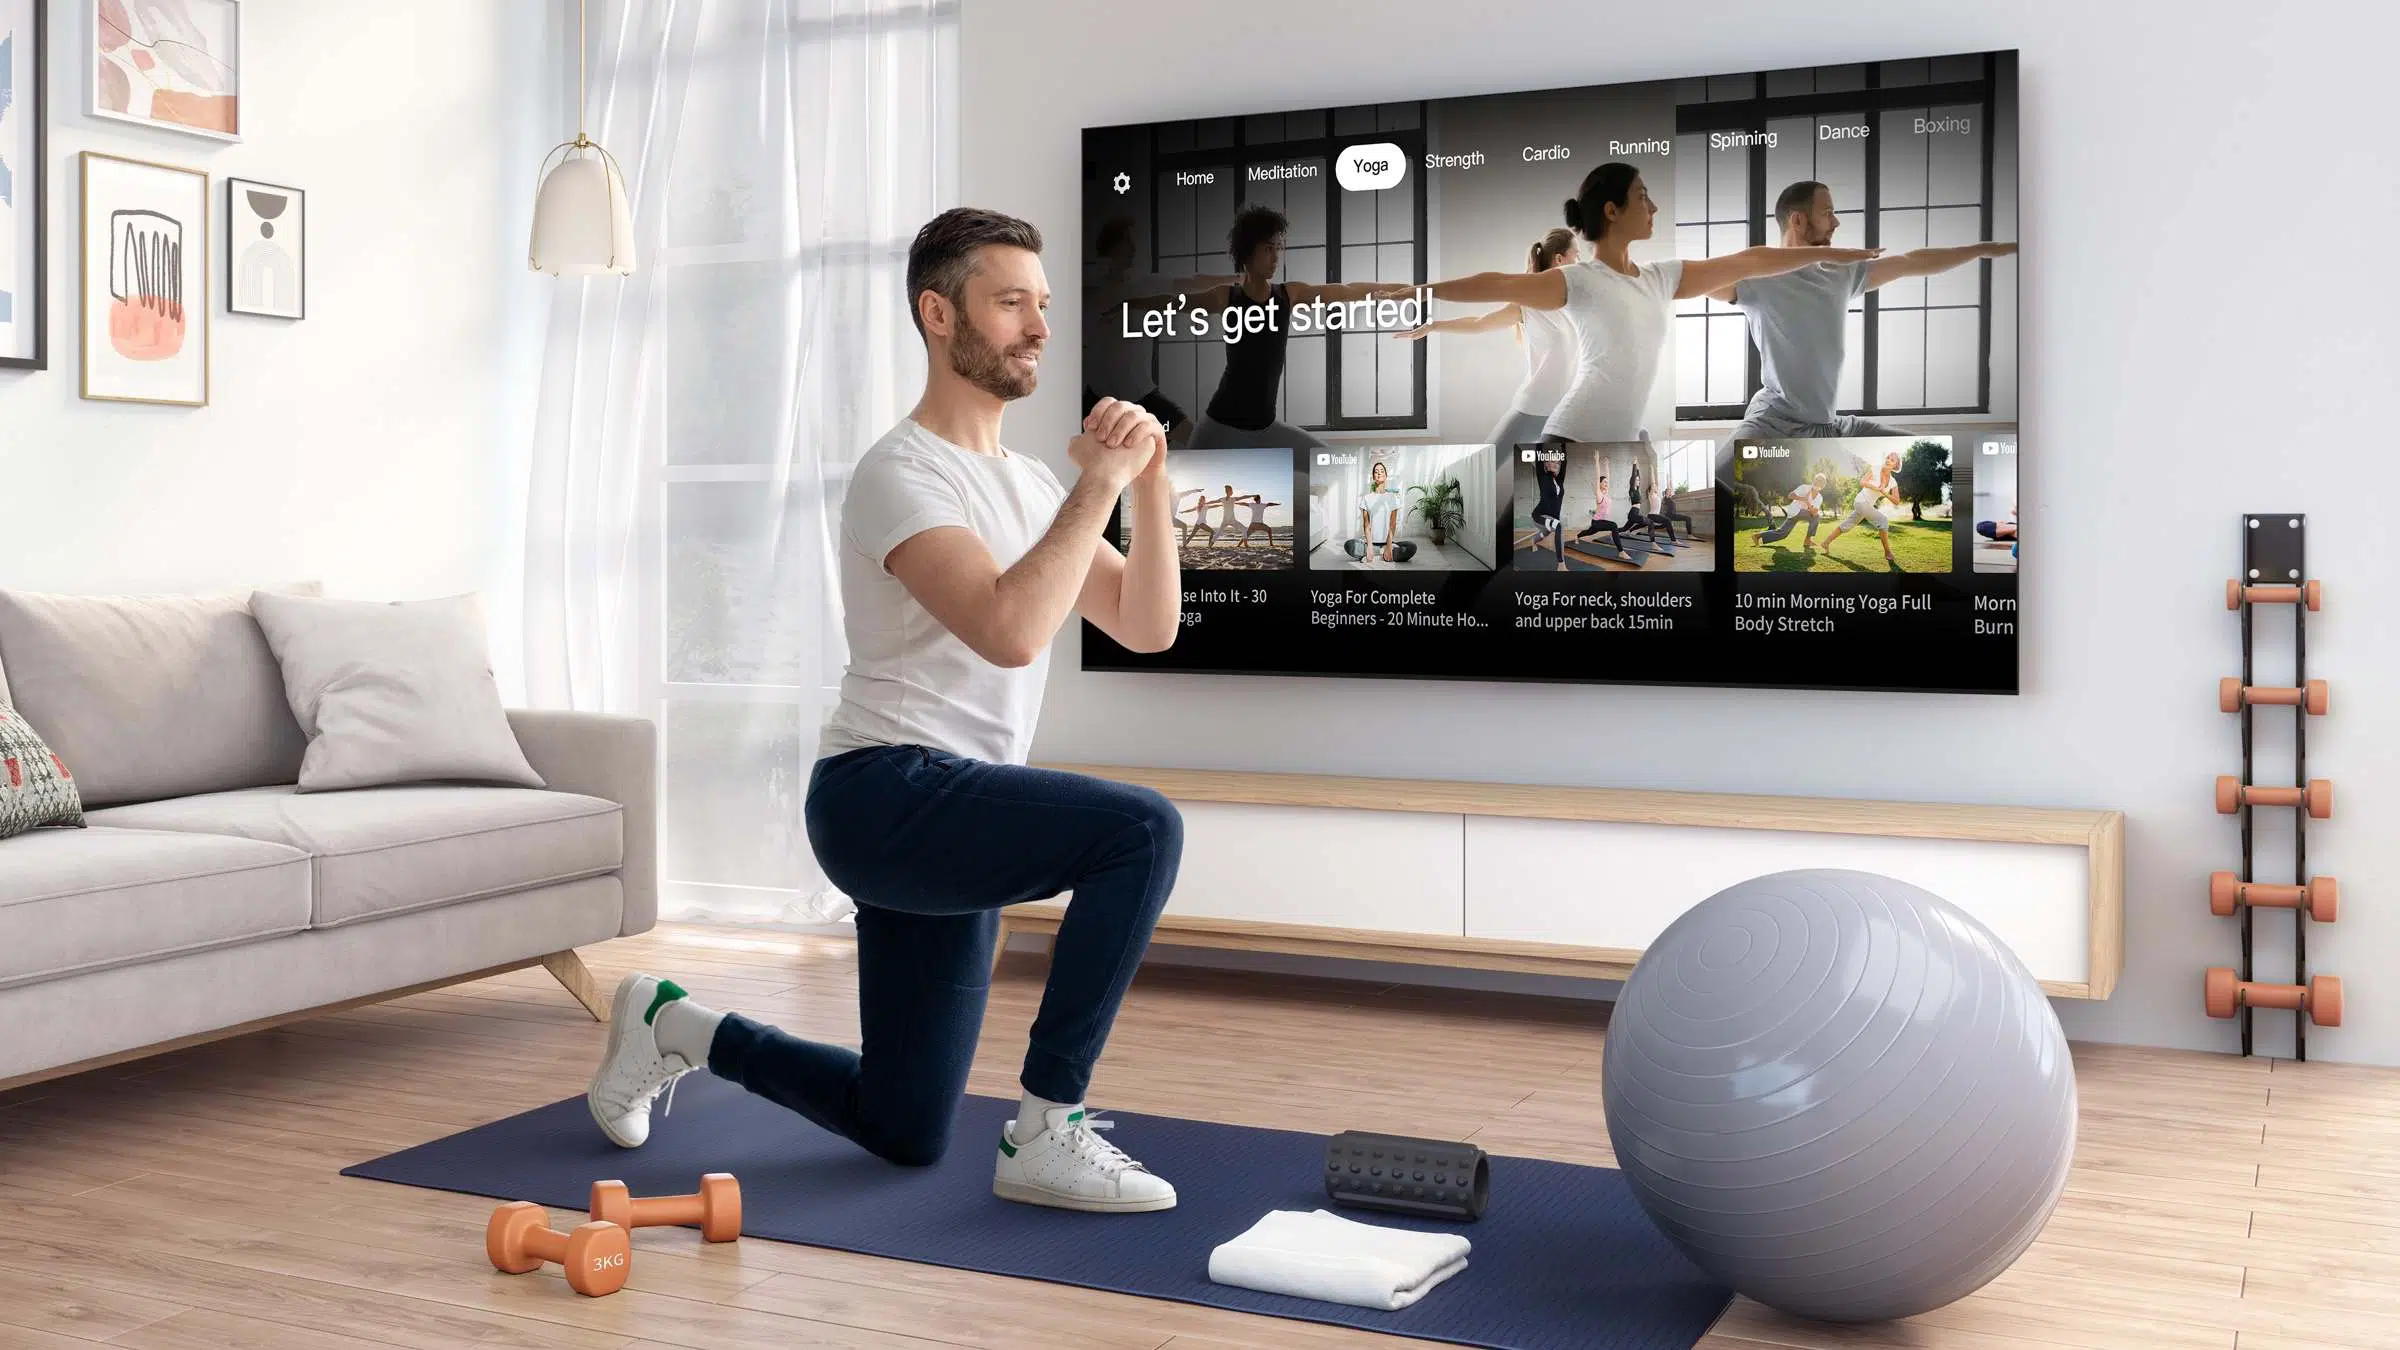 An image featuring a person exercising in front of the TV, with fitness-related content displayed, representing the AR Fitness feature and promoting fitness training at home.